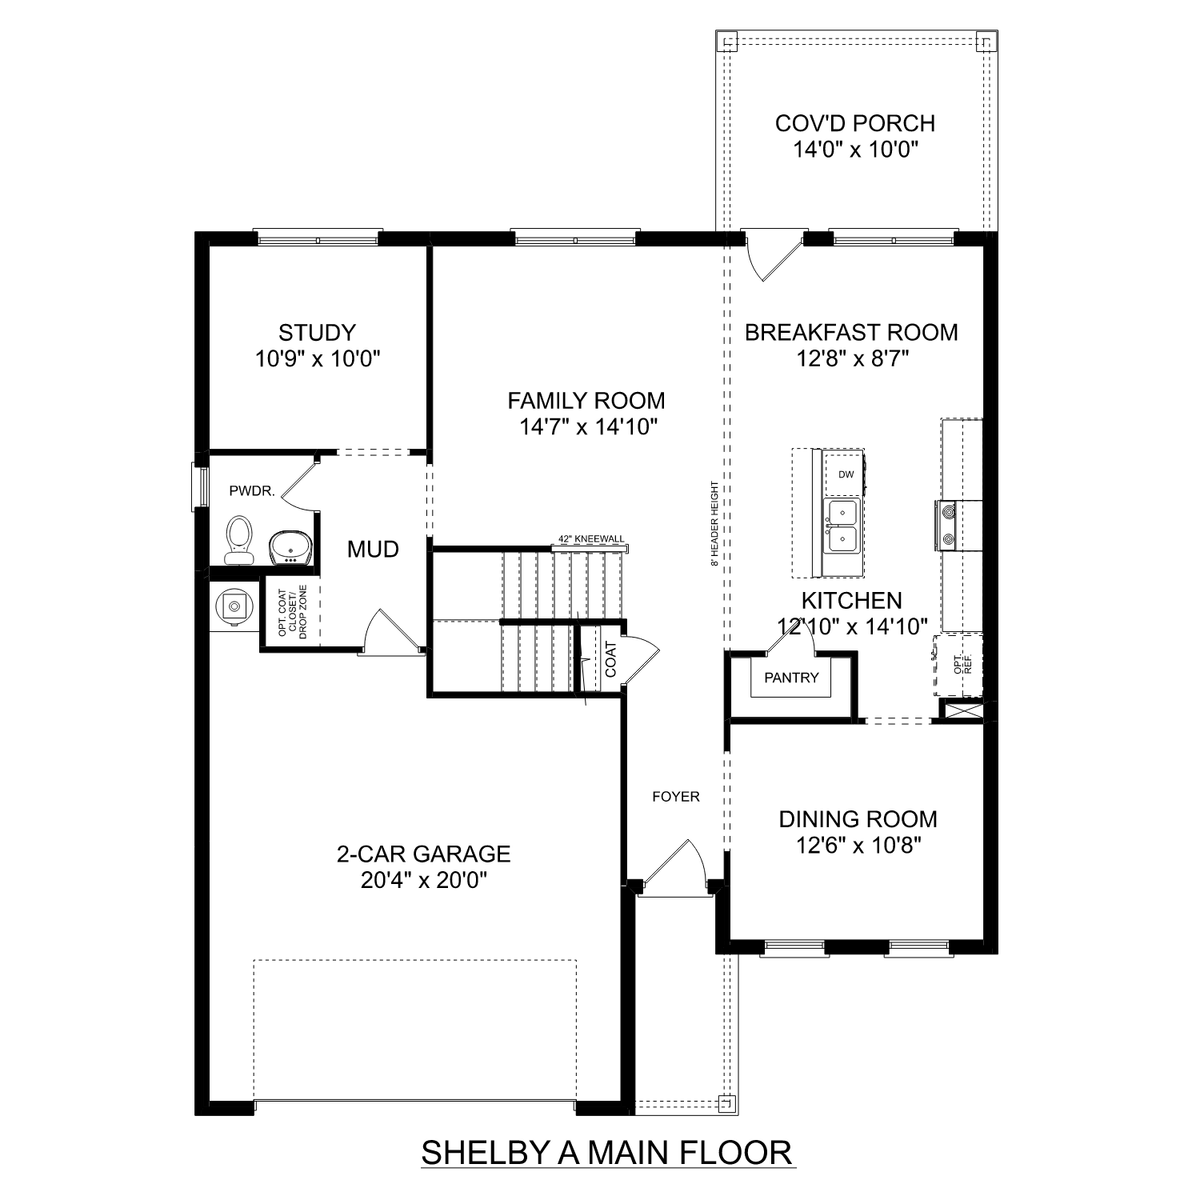 1 - The Shelby A floor plan layout for 1911 Dawn Court in Davidson Homes' Cain Park community.